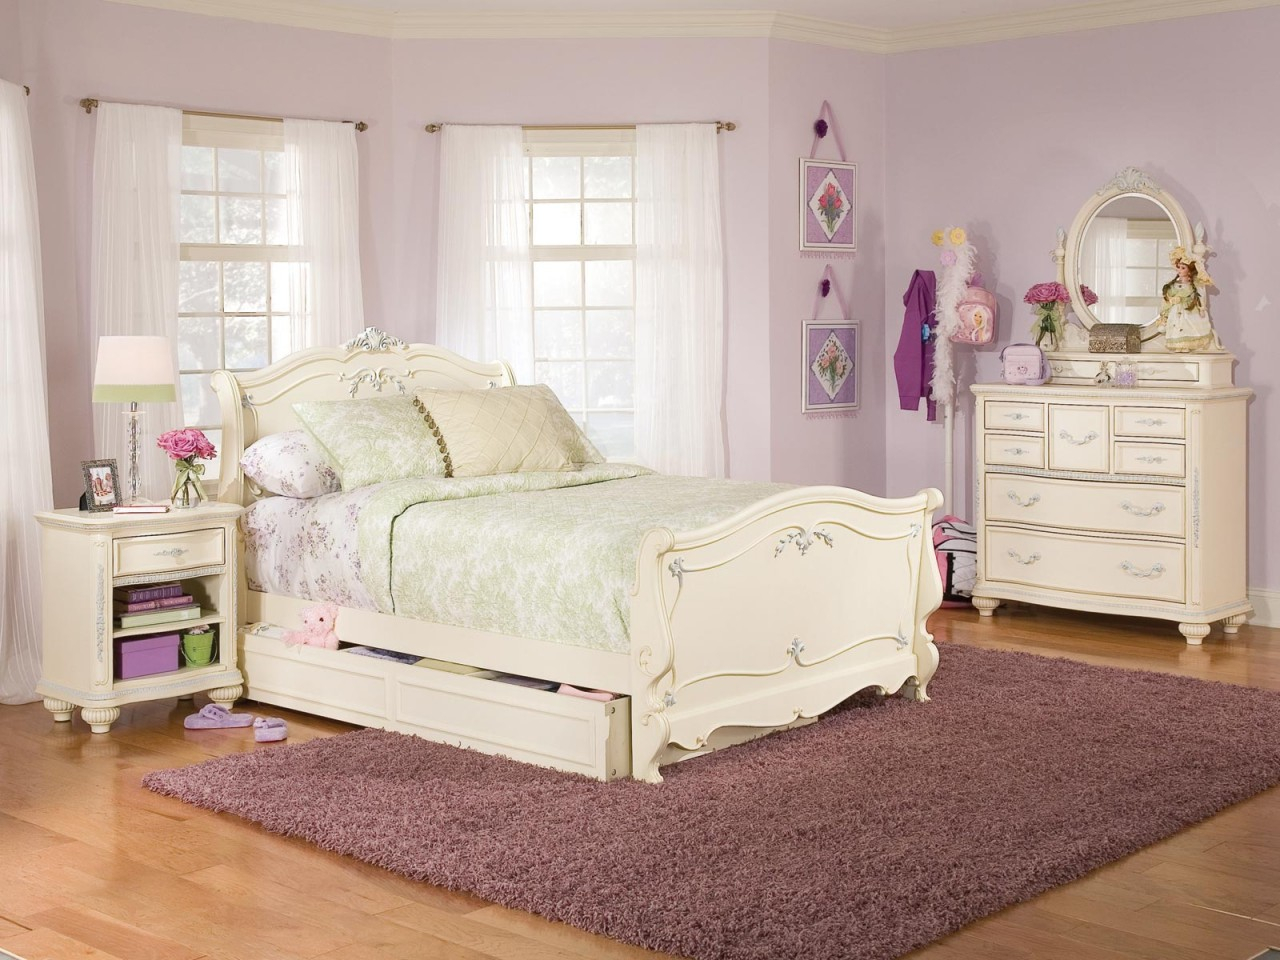 Bedroom Girls White Bedroom Furniture Bunk Bed With Dresser Girls throughout sizing 1280 X 960